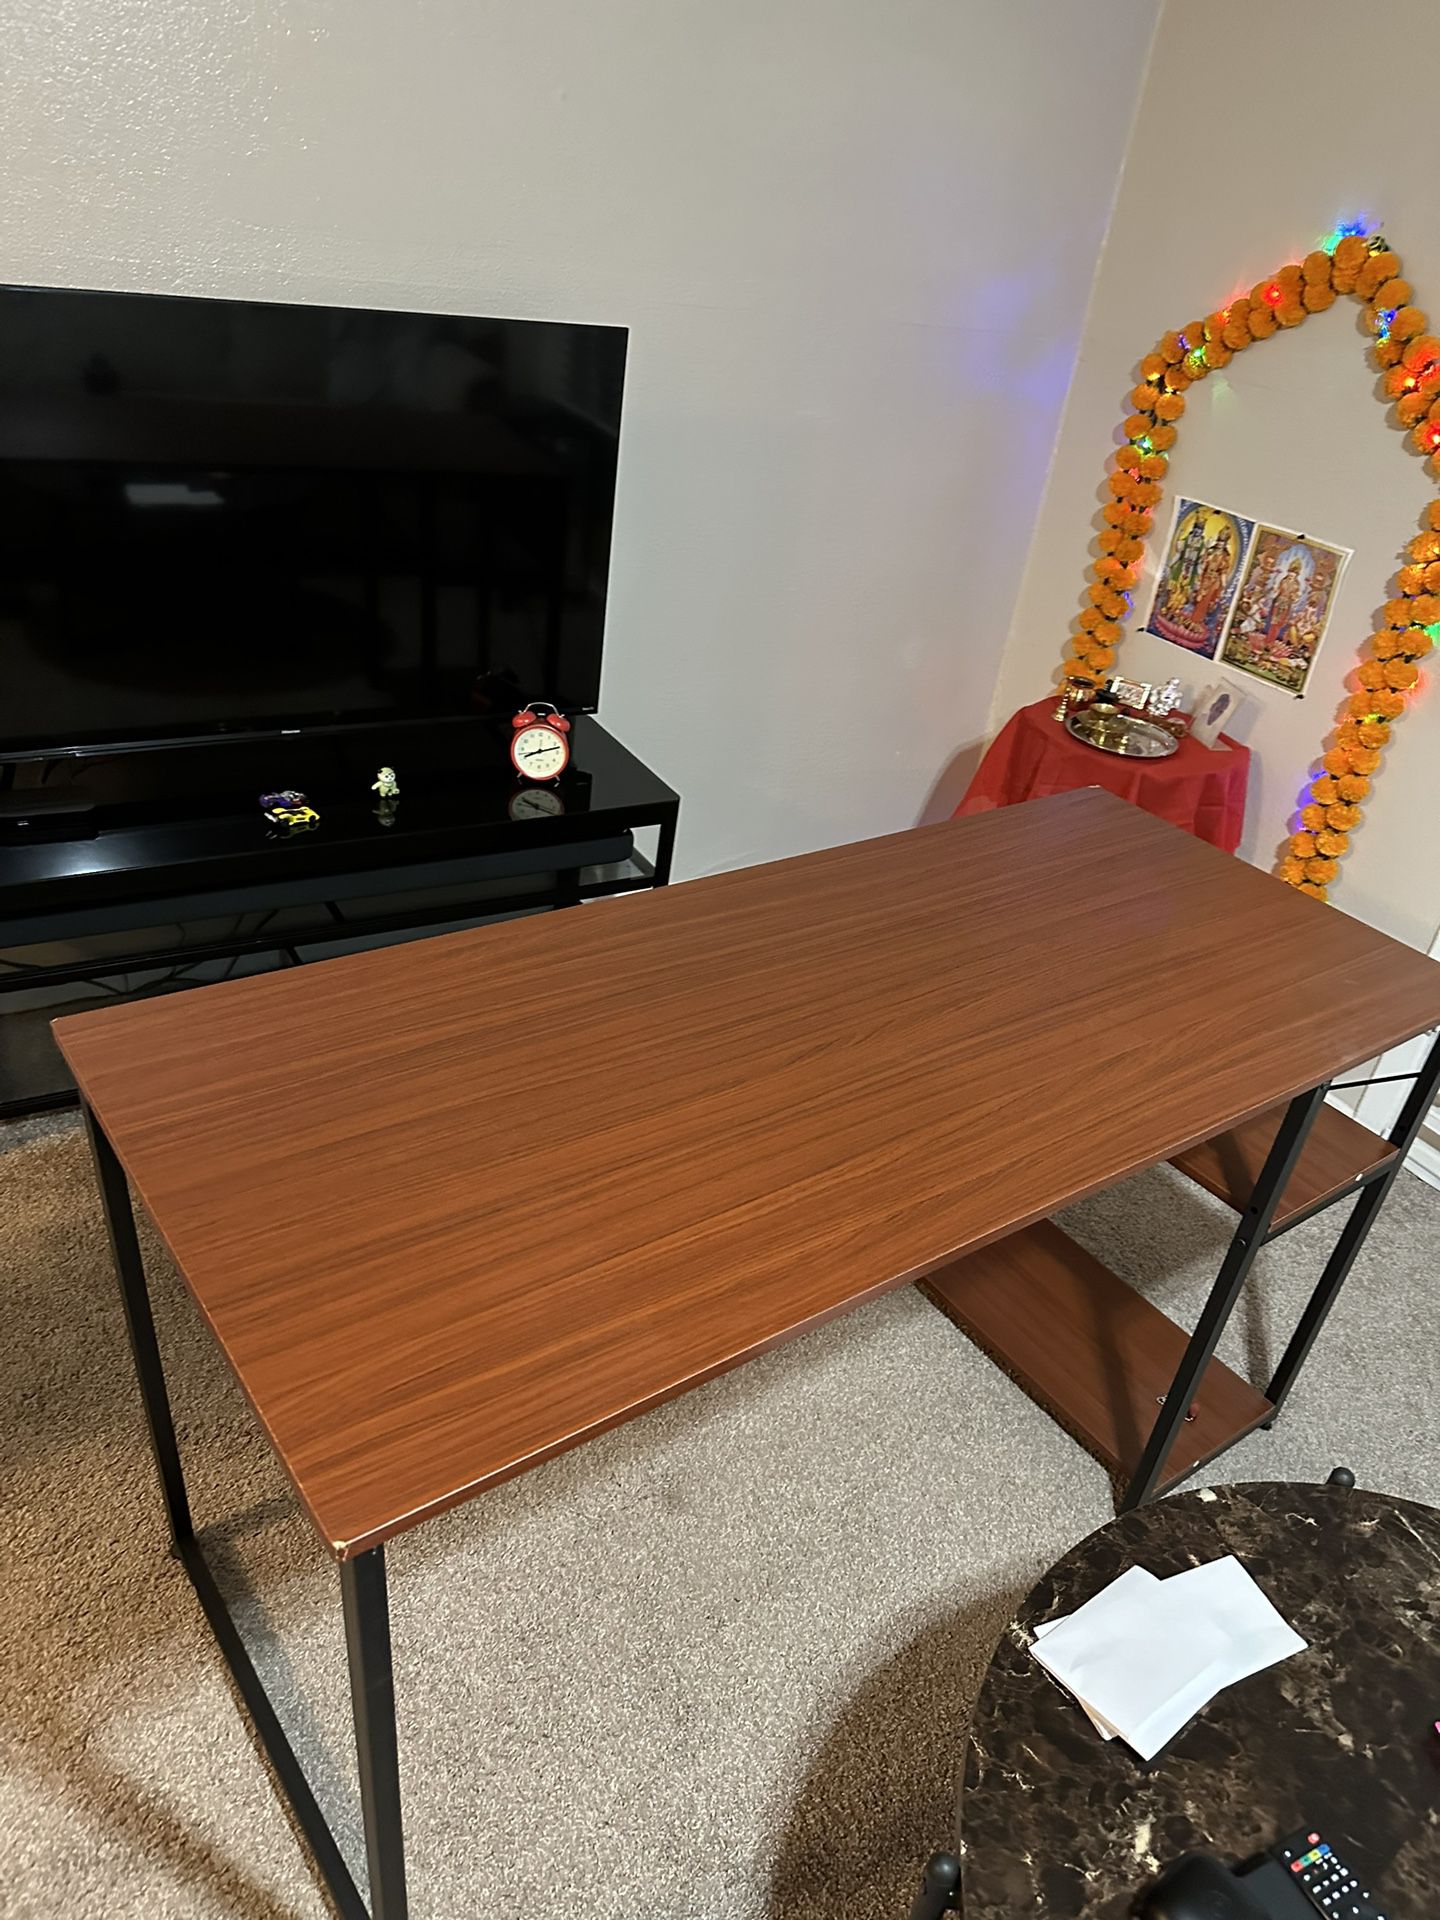 Office Table / Study Table 